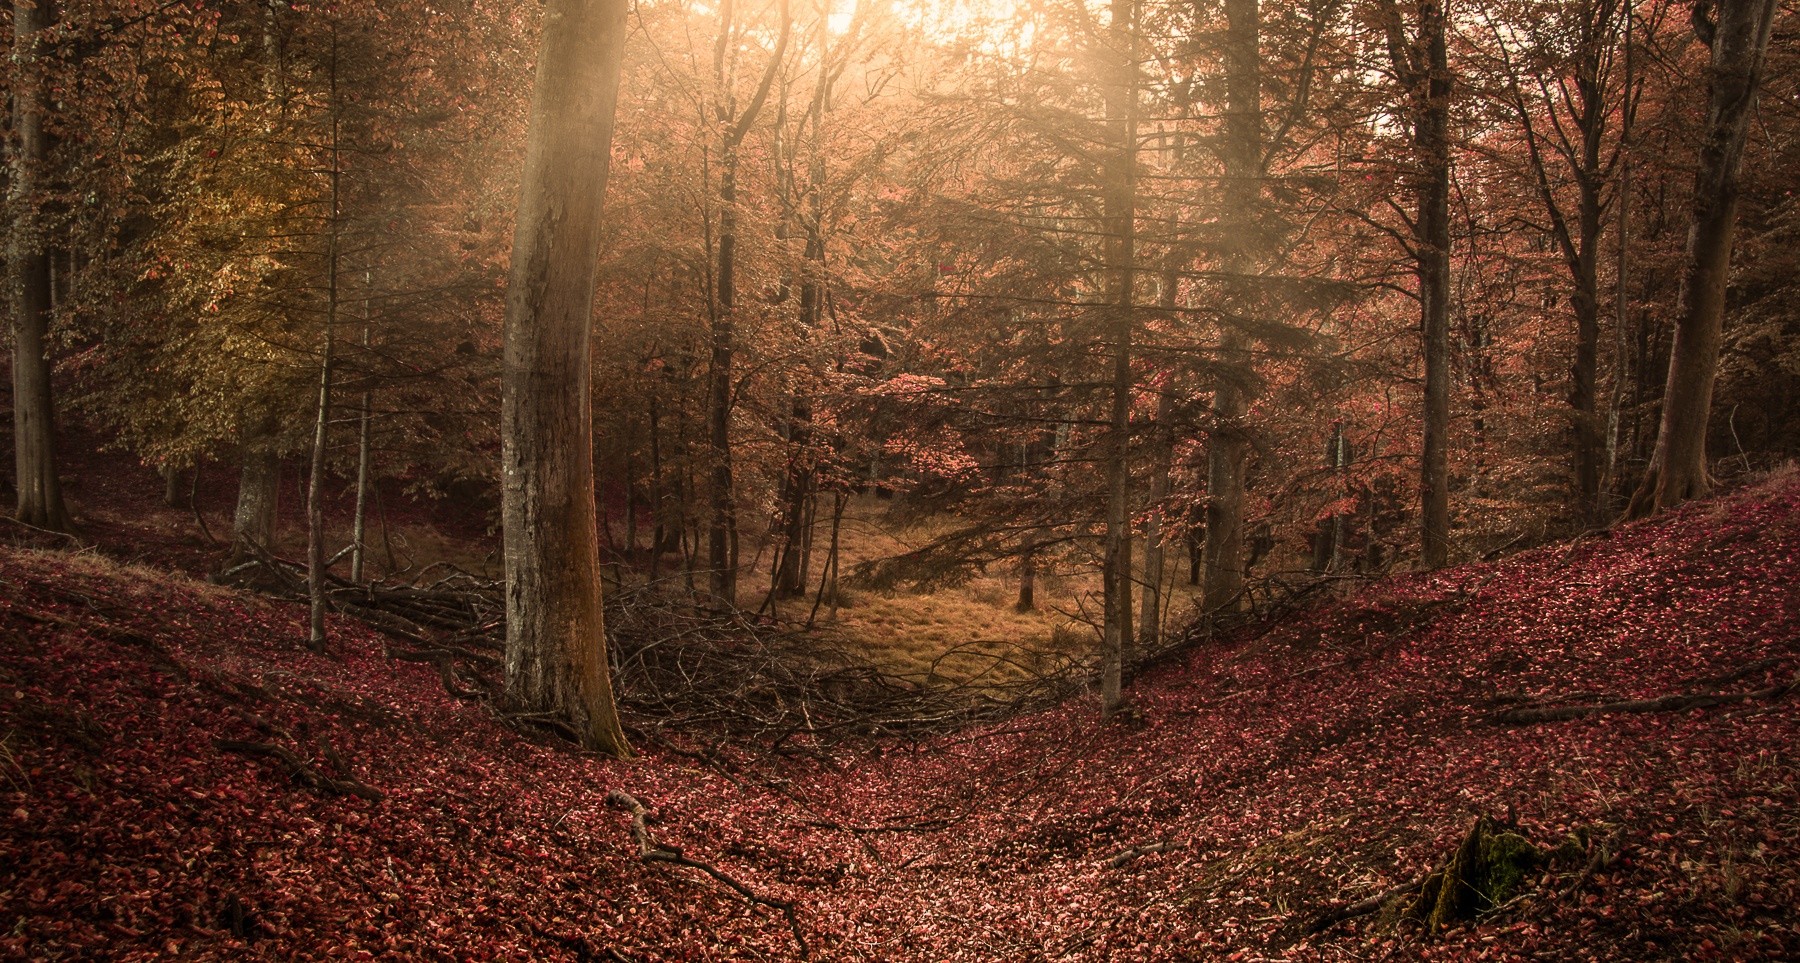 General 1800x963 forest sun rays trees leaves hills nature outdoors fallen leaves fall plants sunlight